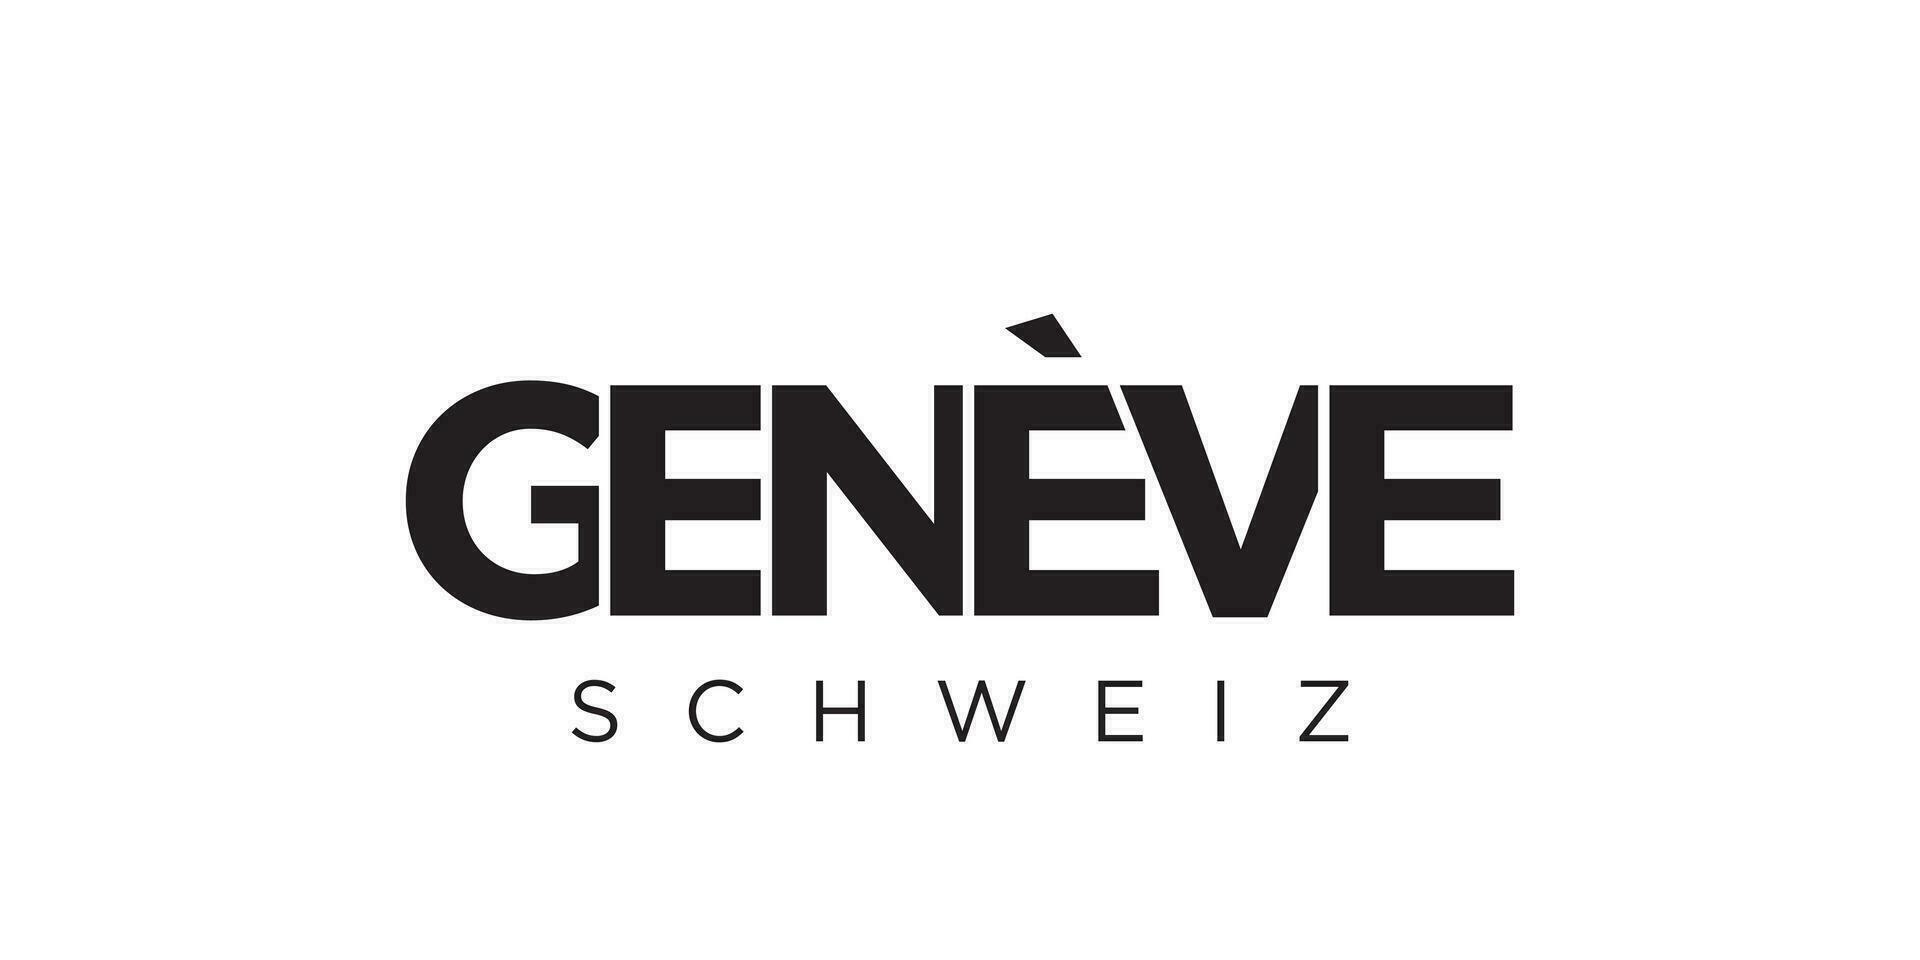 Geneva in the Switzerland emblem. The design features a geometric style, vector illustration with bold typography in a modern font. The graphic slogan lettering.